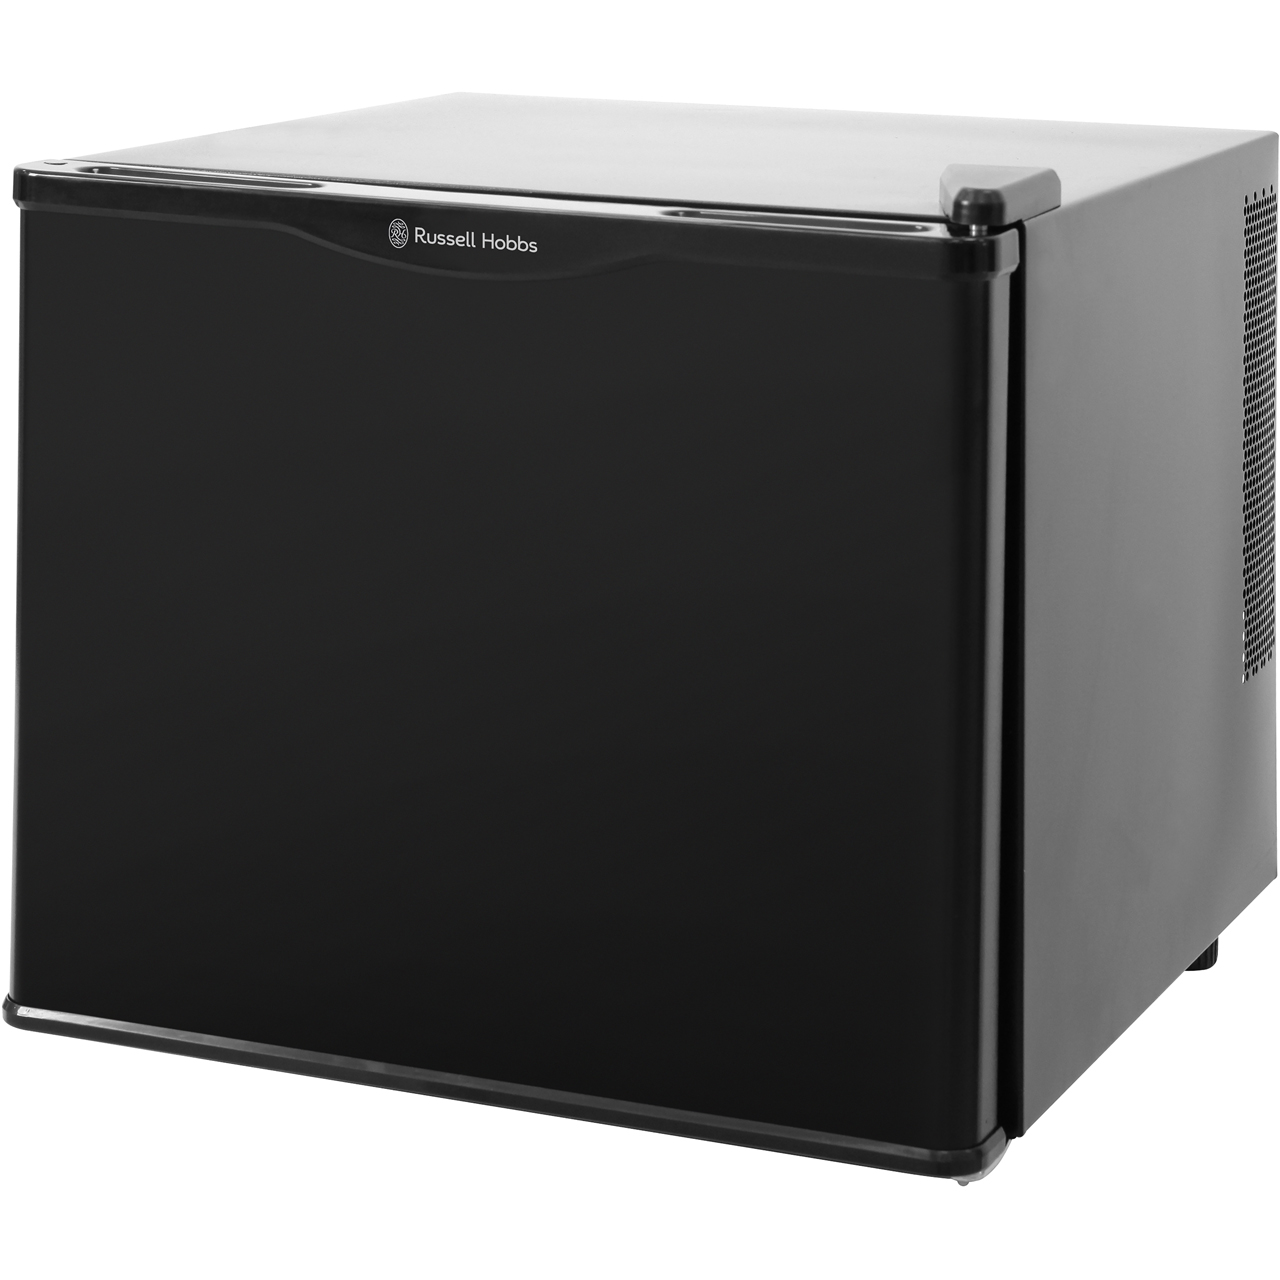 Russell Hobbs RHCLRF17B Table Top Cooler specs